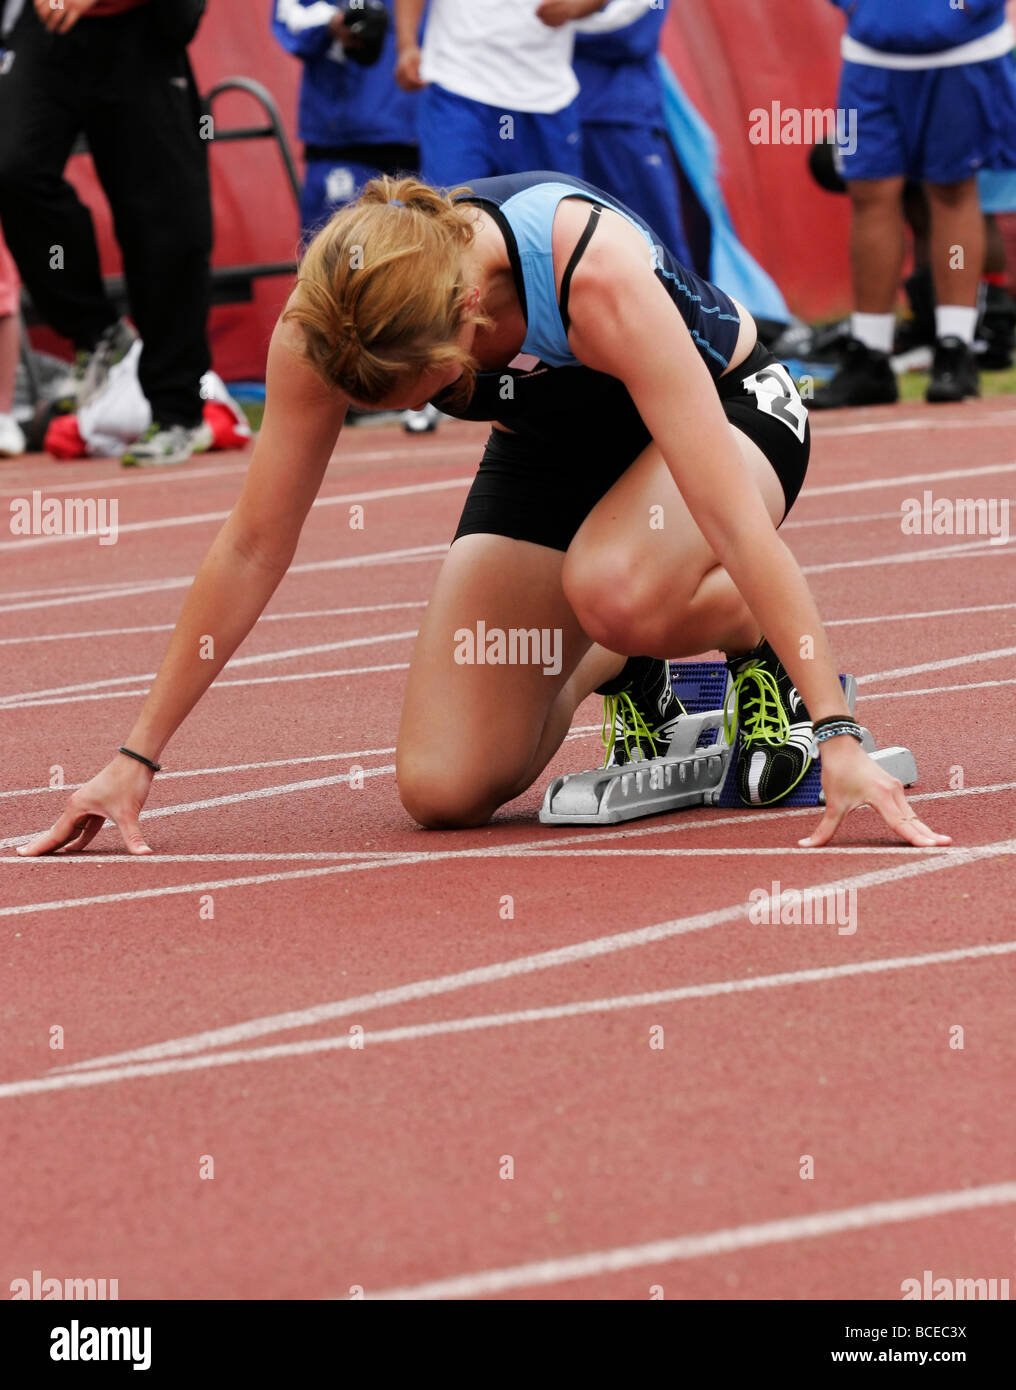 Female Athlete Waiting In The Starting Blocks For The 100m Dash Stock Photo Alamy